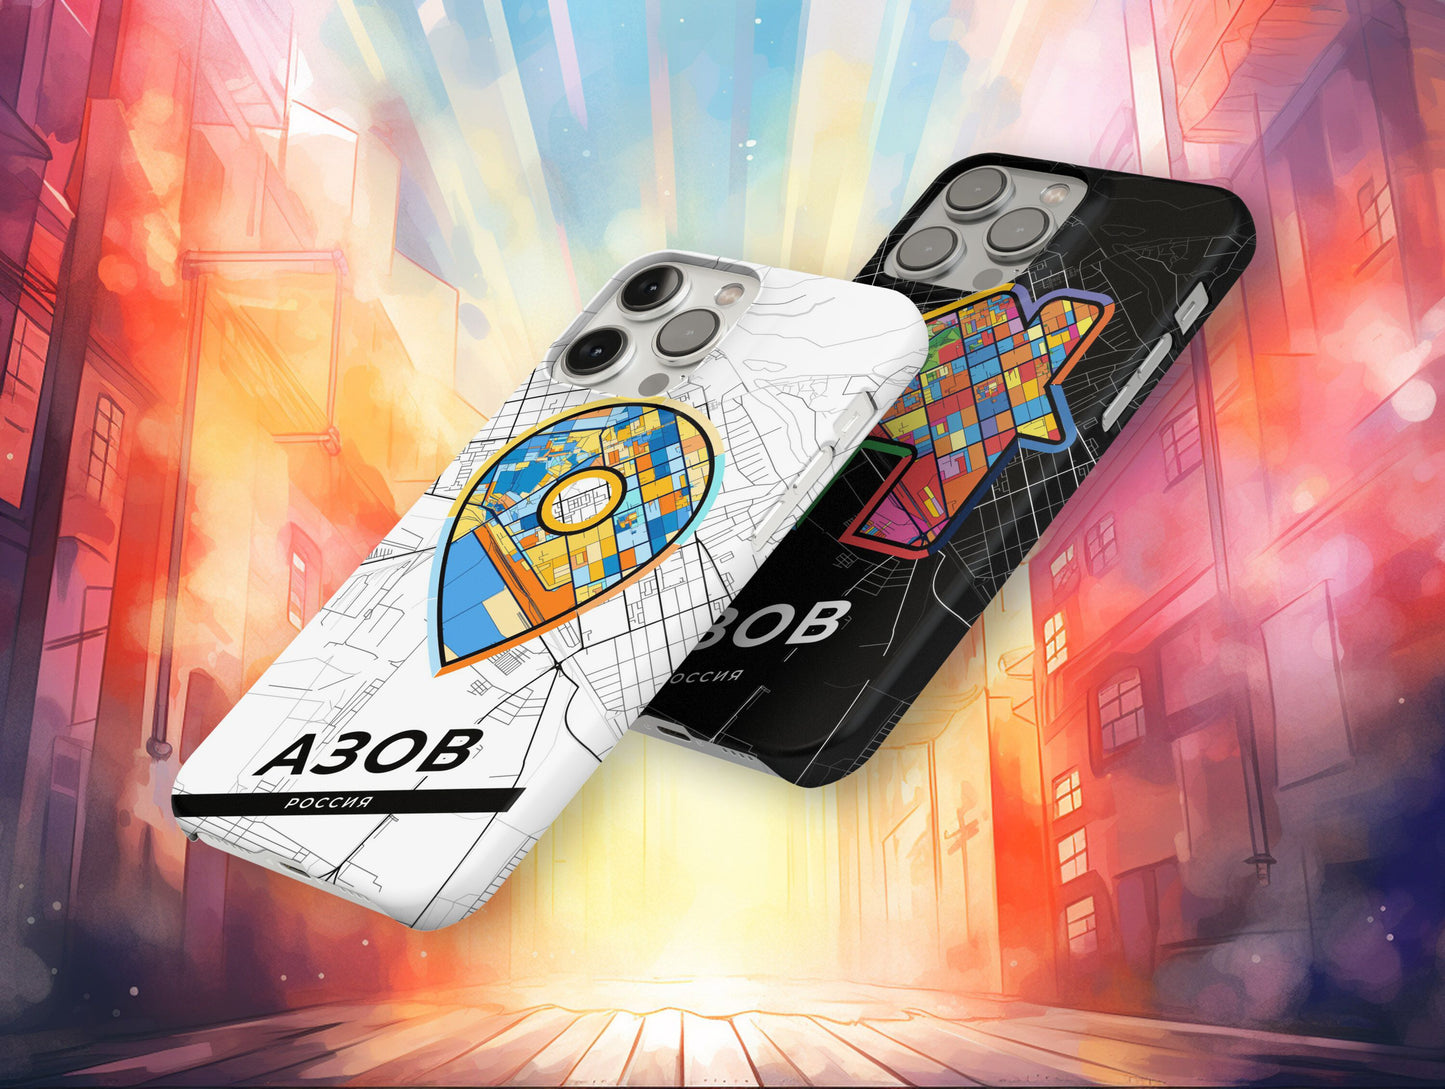 Azov Russia slim phone case with colorful icon. Birthday, wedding or housewarming gift. Couple match cases.